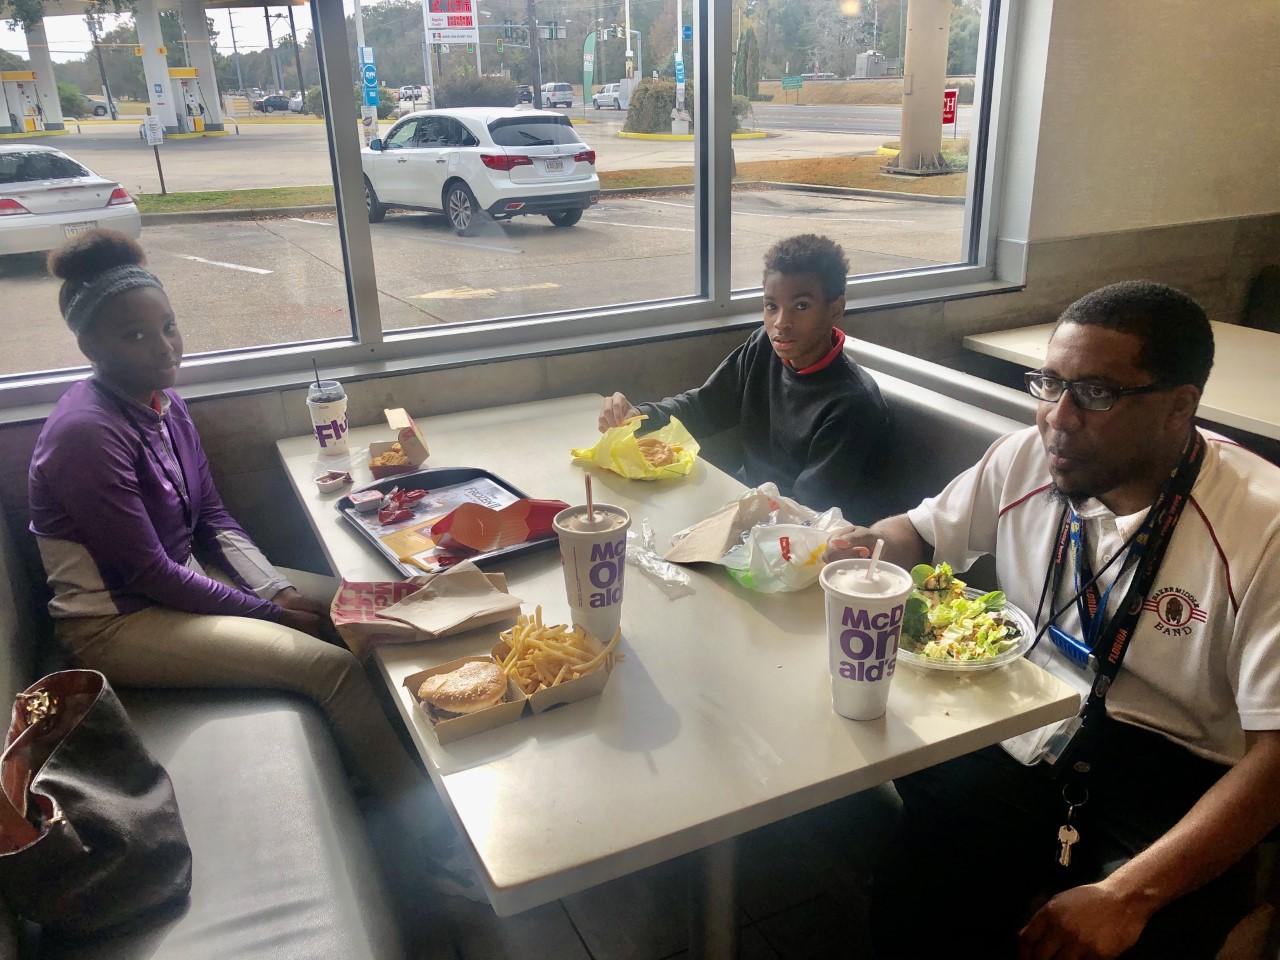 A photo of Baker Middle School's November teacher and students of the month having a complimentary meal at McDonald's